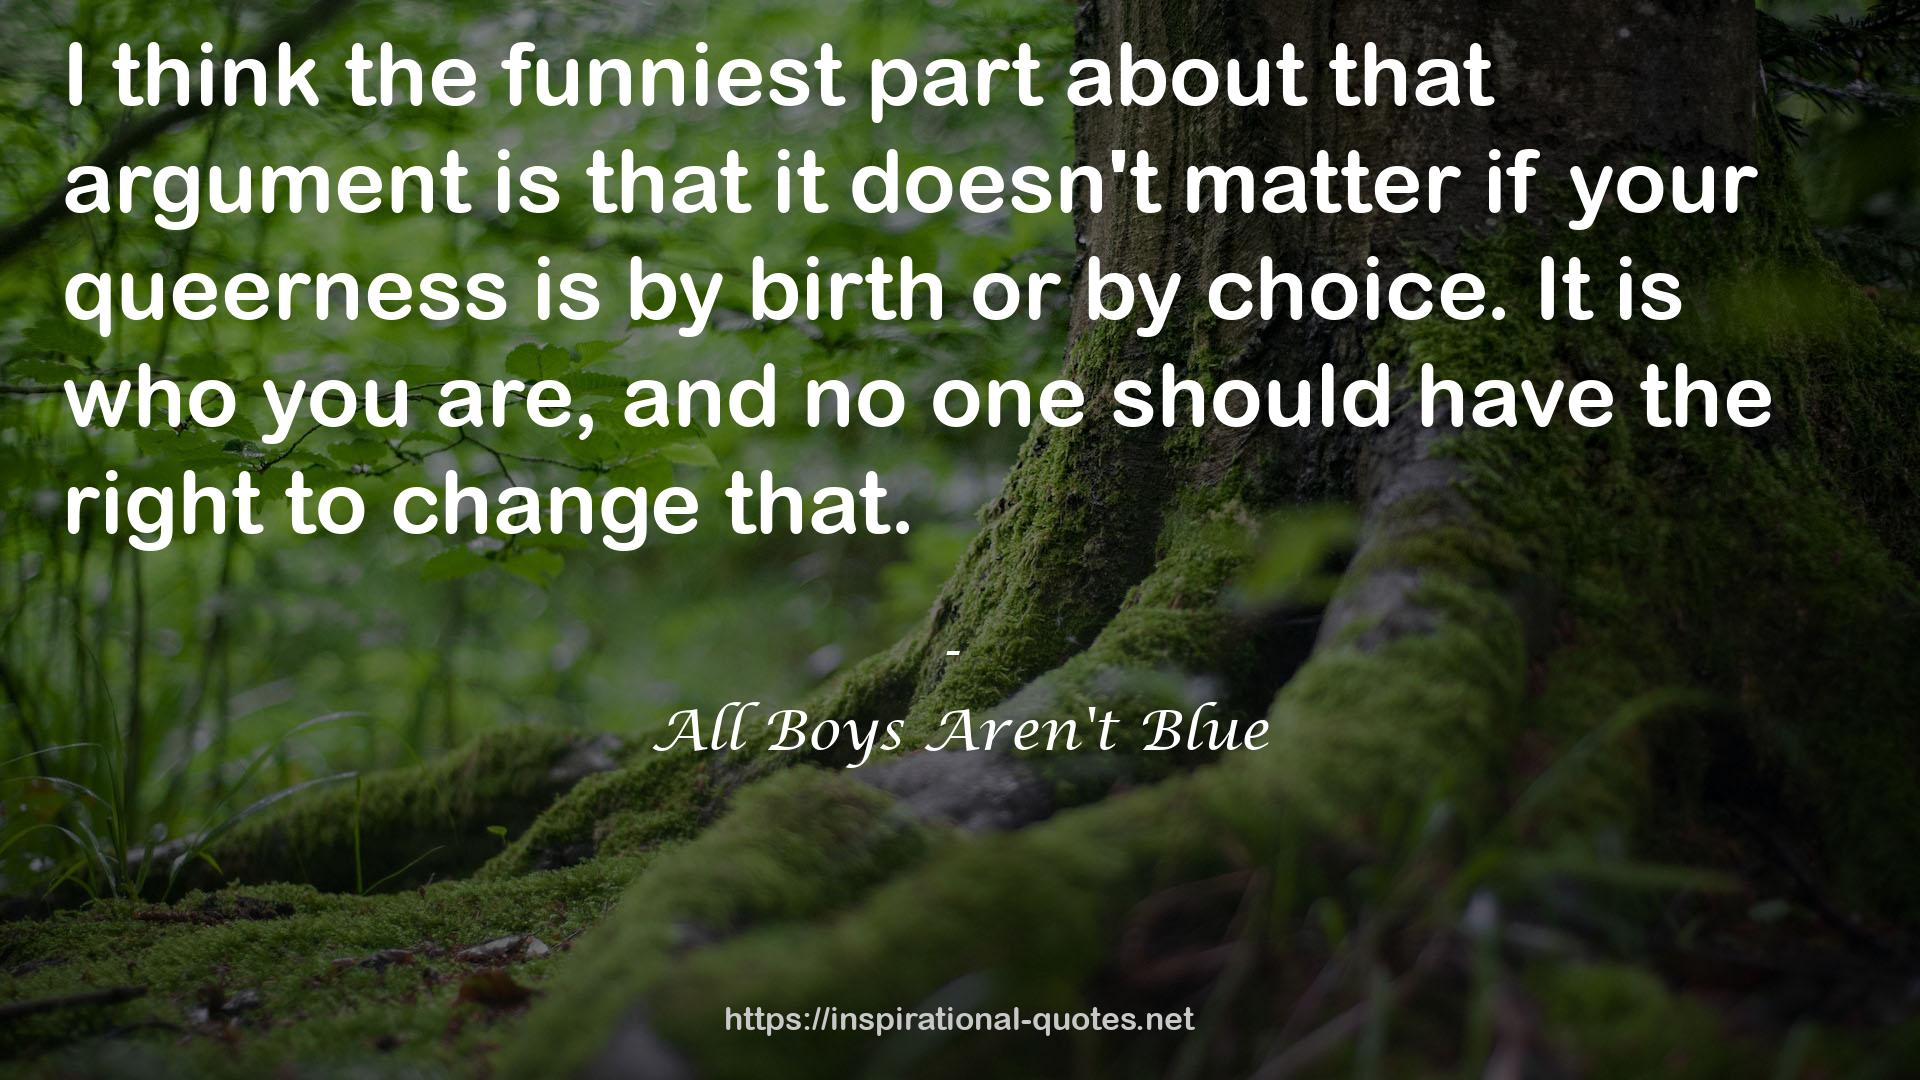 All Boys Aren't Blue QUOTES